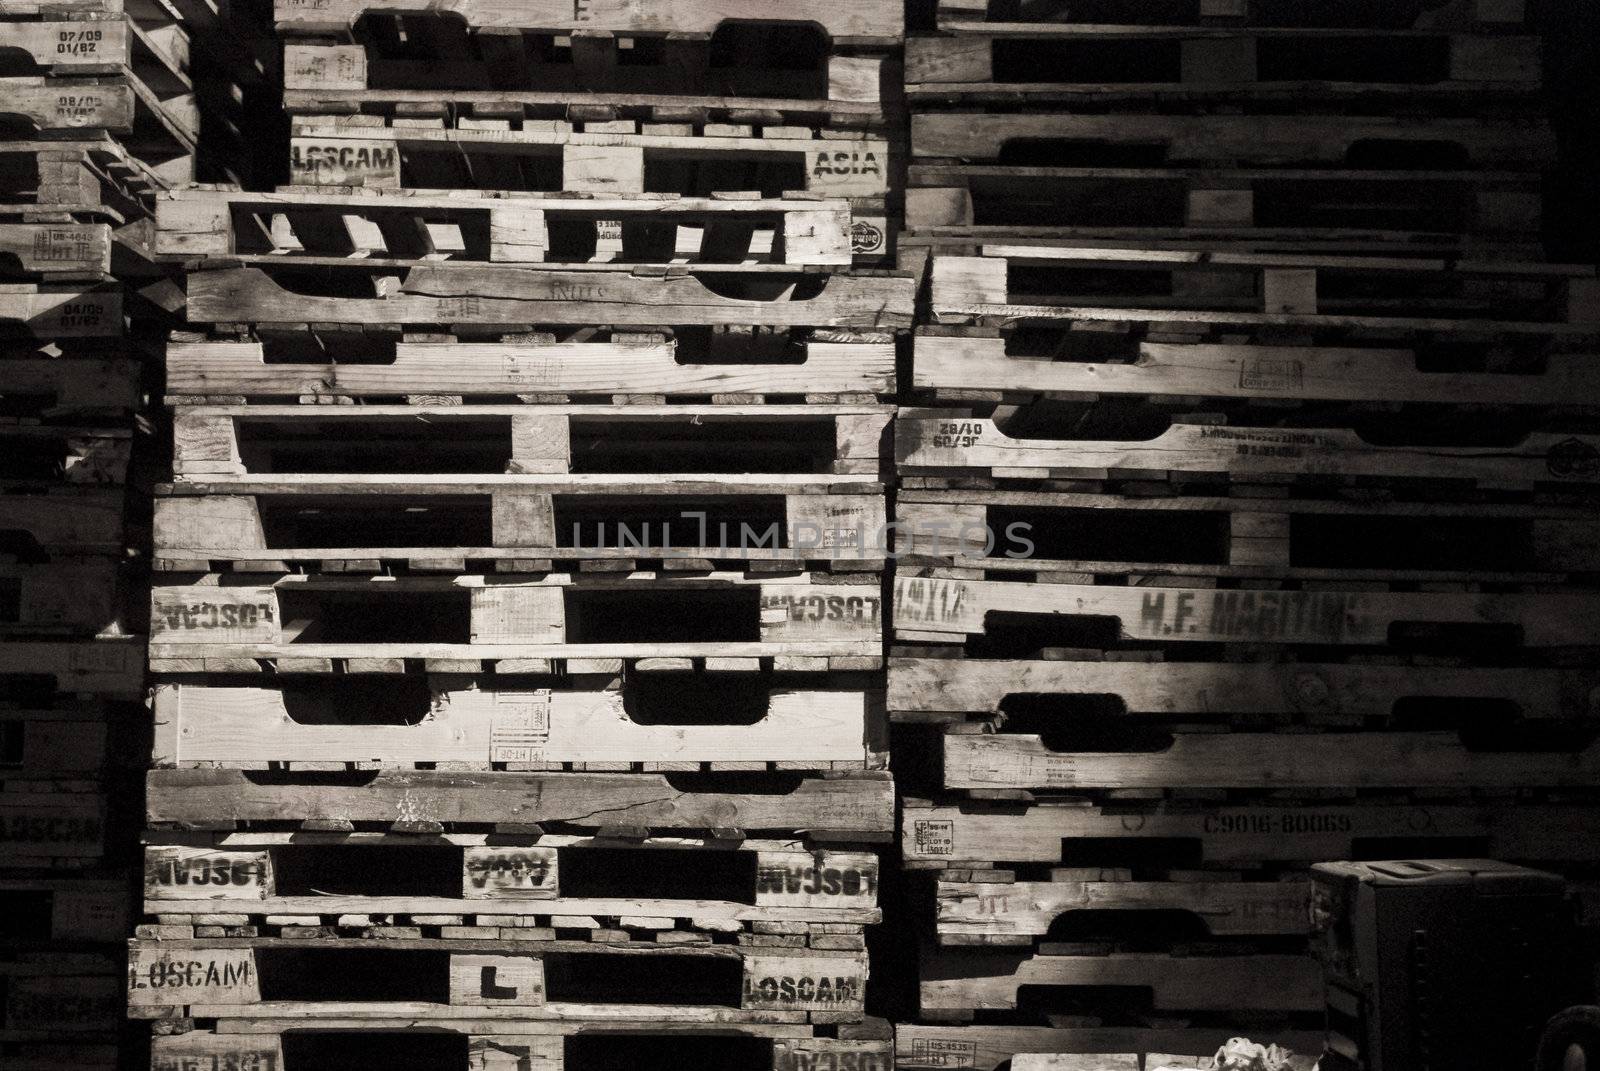 Piles of wooden pallets in balck and white.